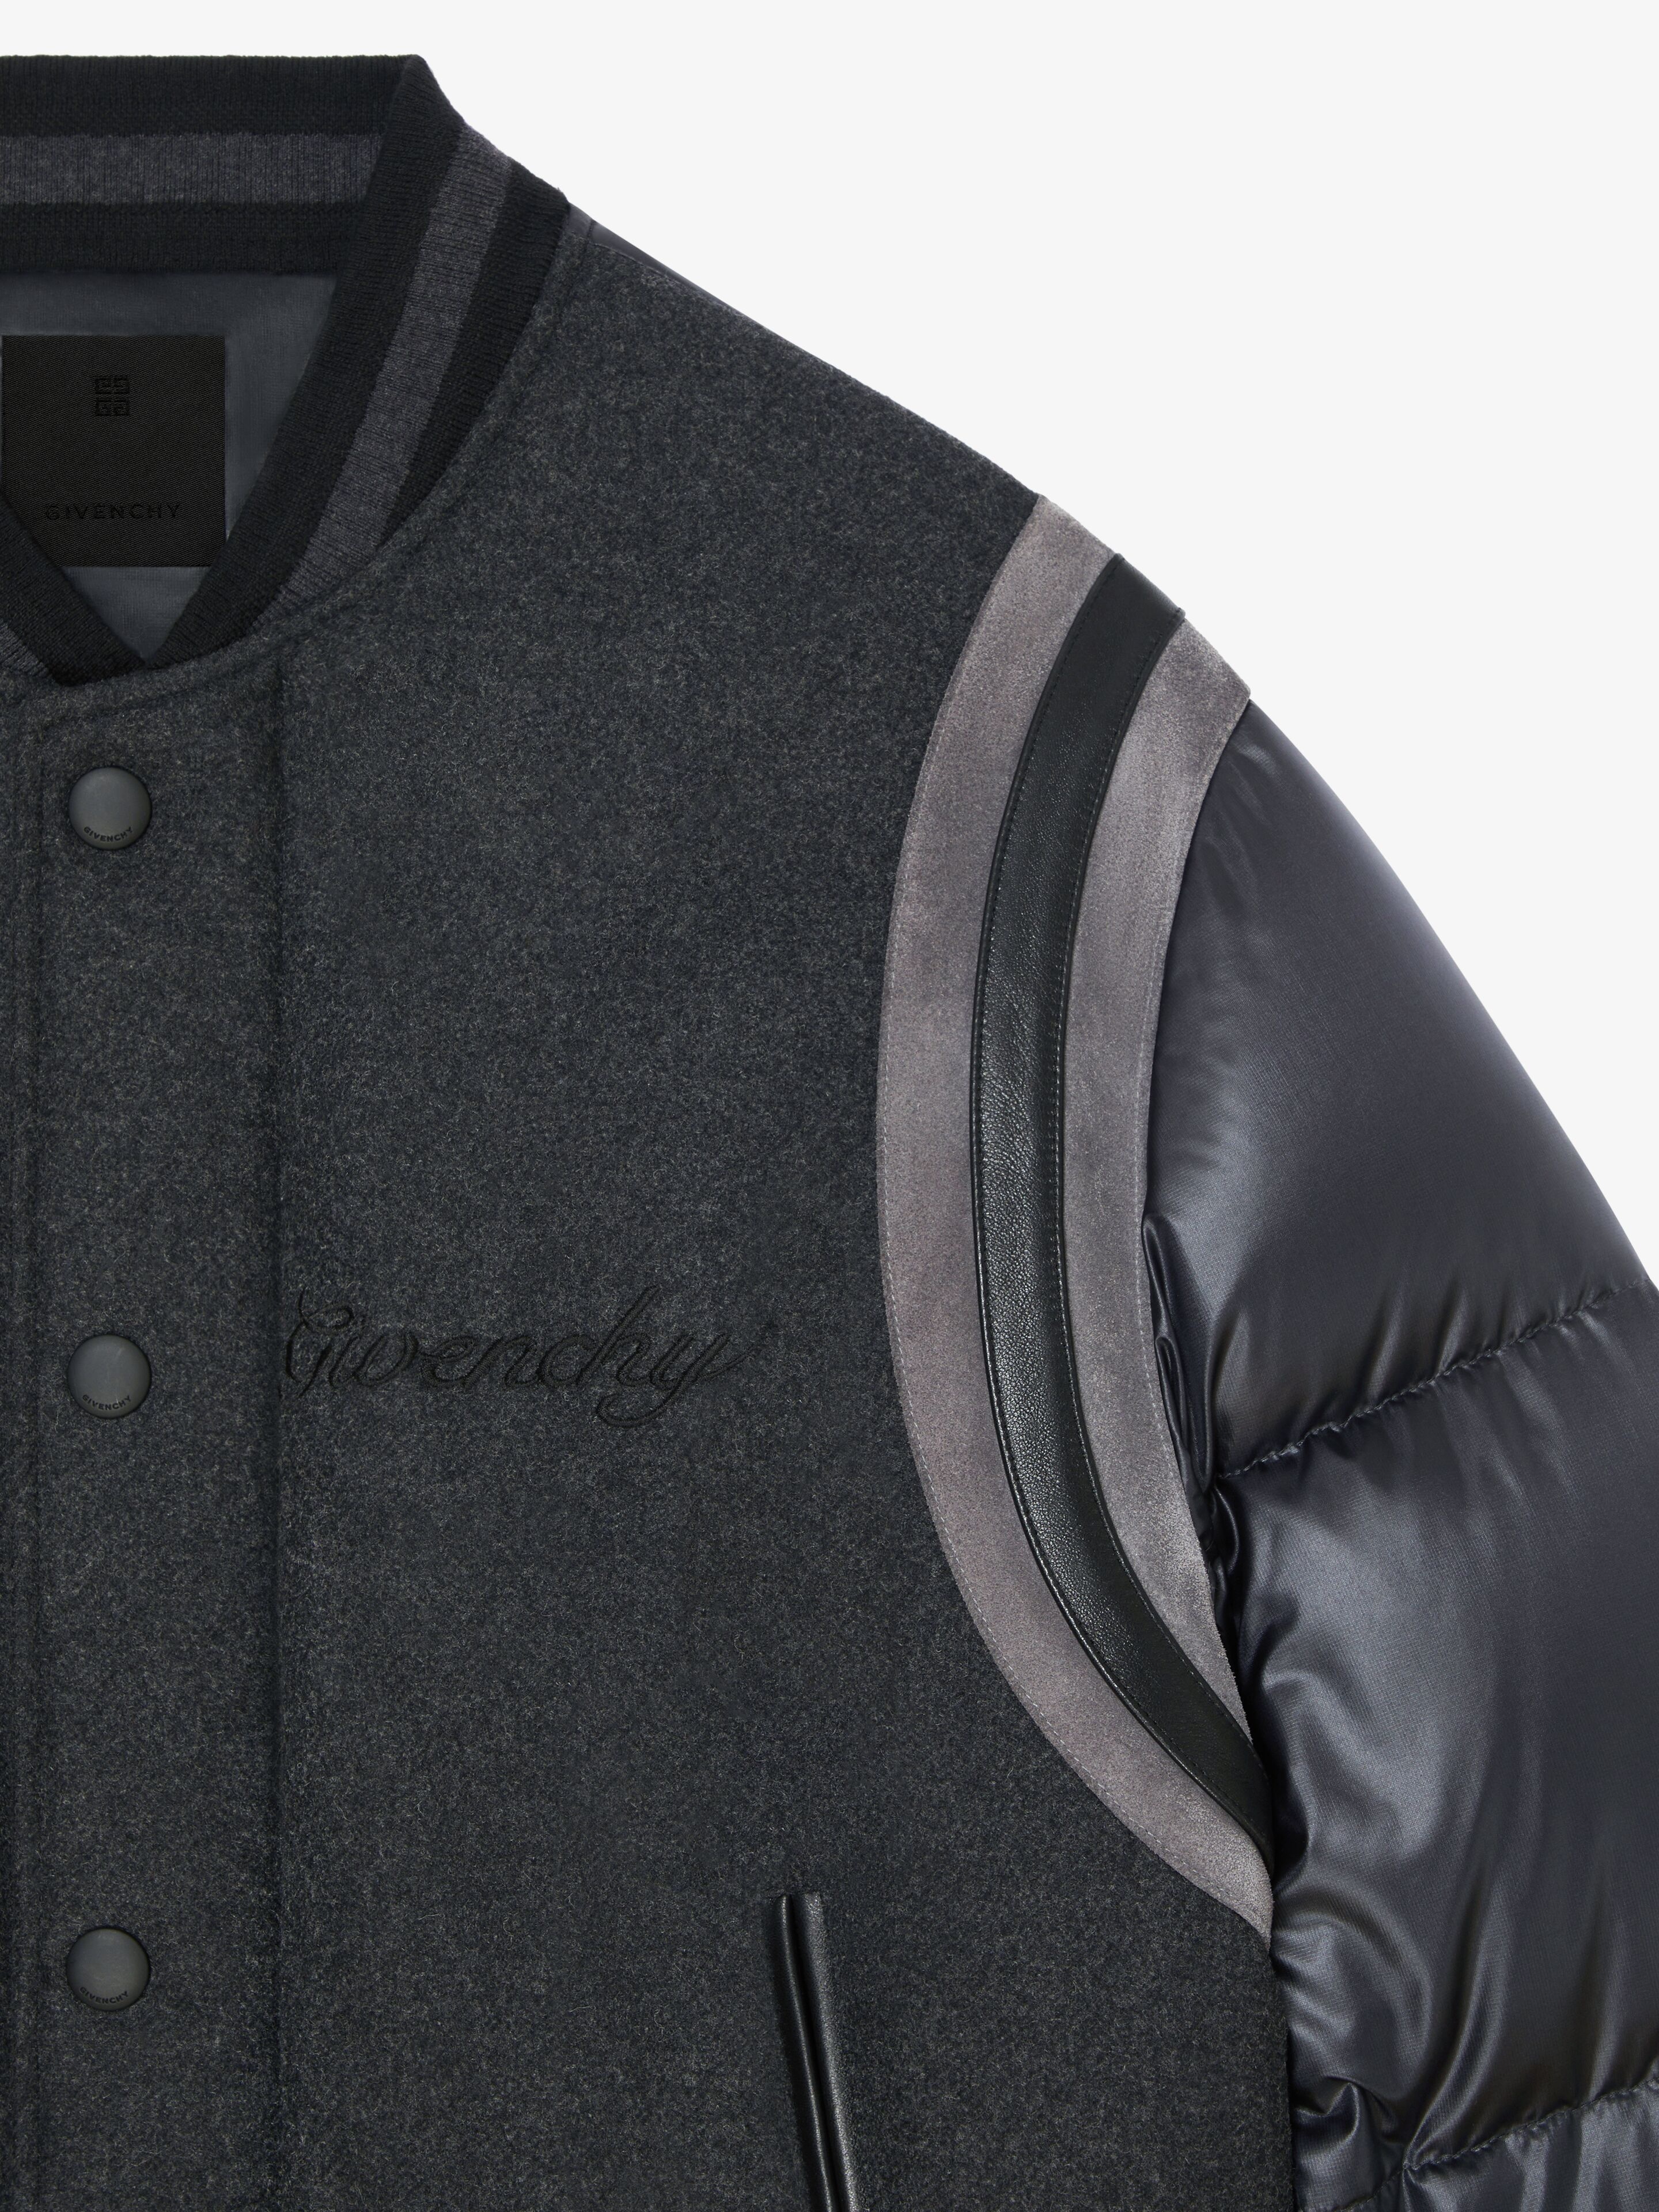 VARSITY JACKET IN WOOL WITH PUFFER SLEEVES AND BACK - 5